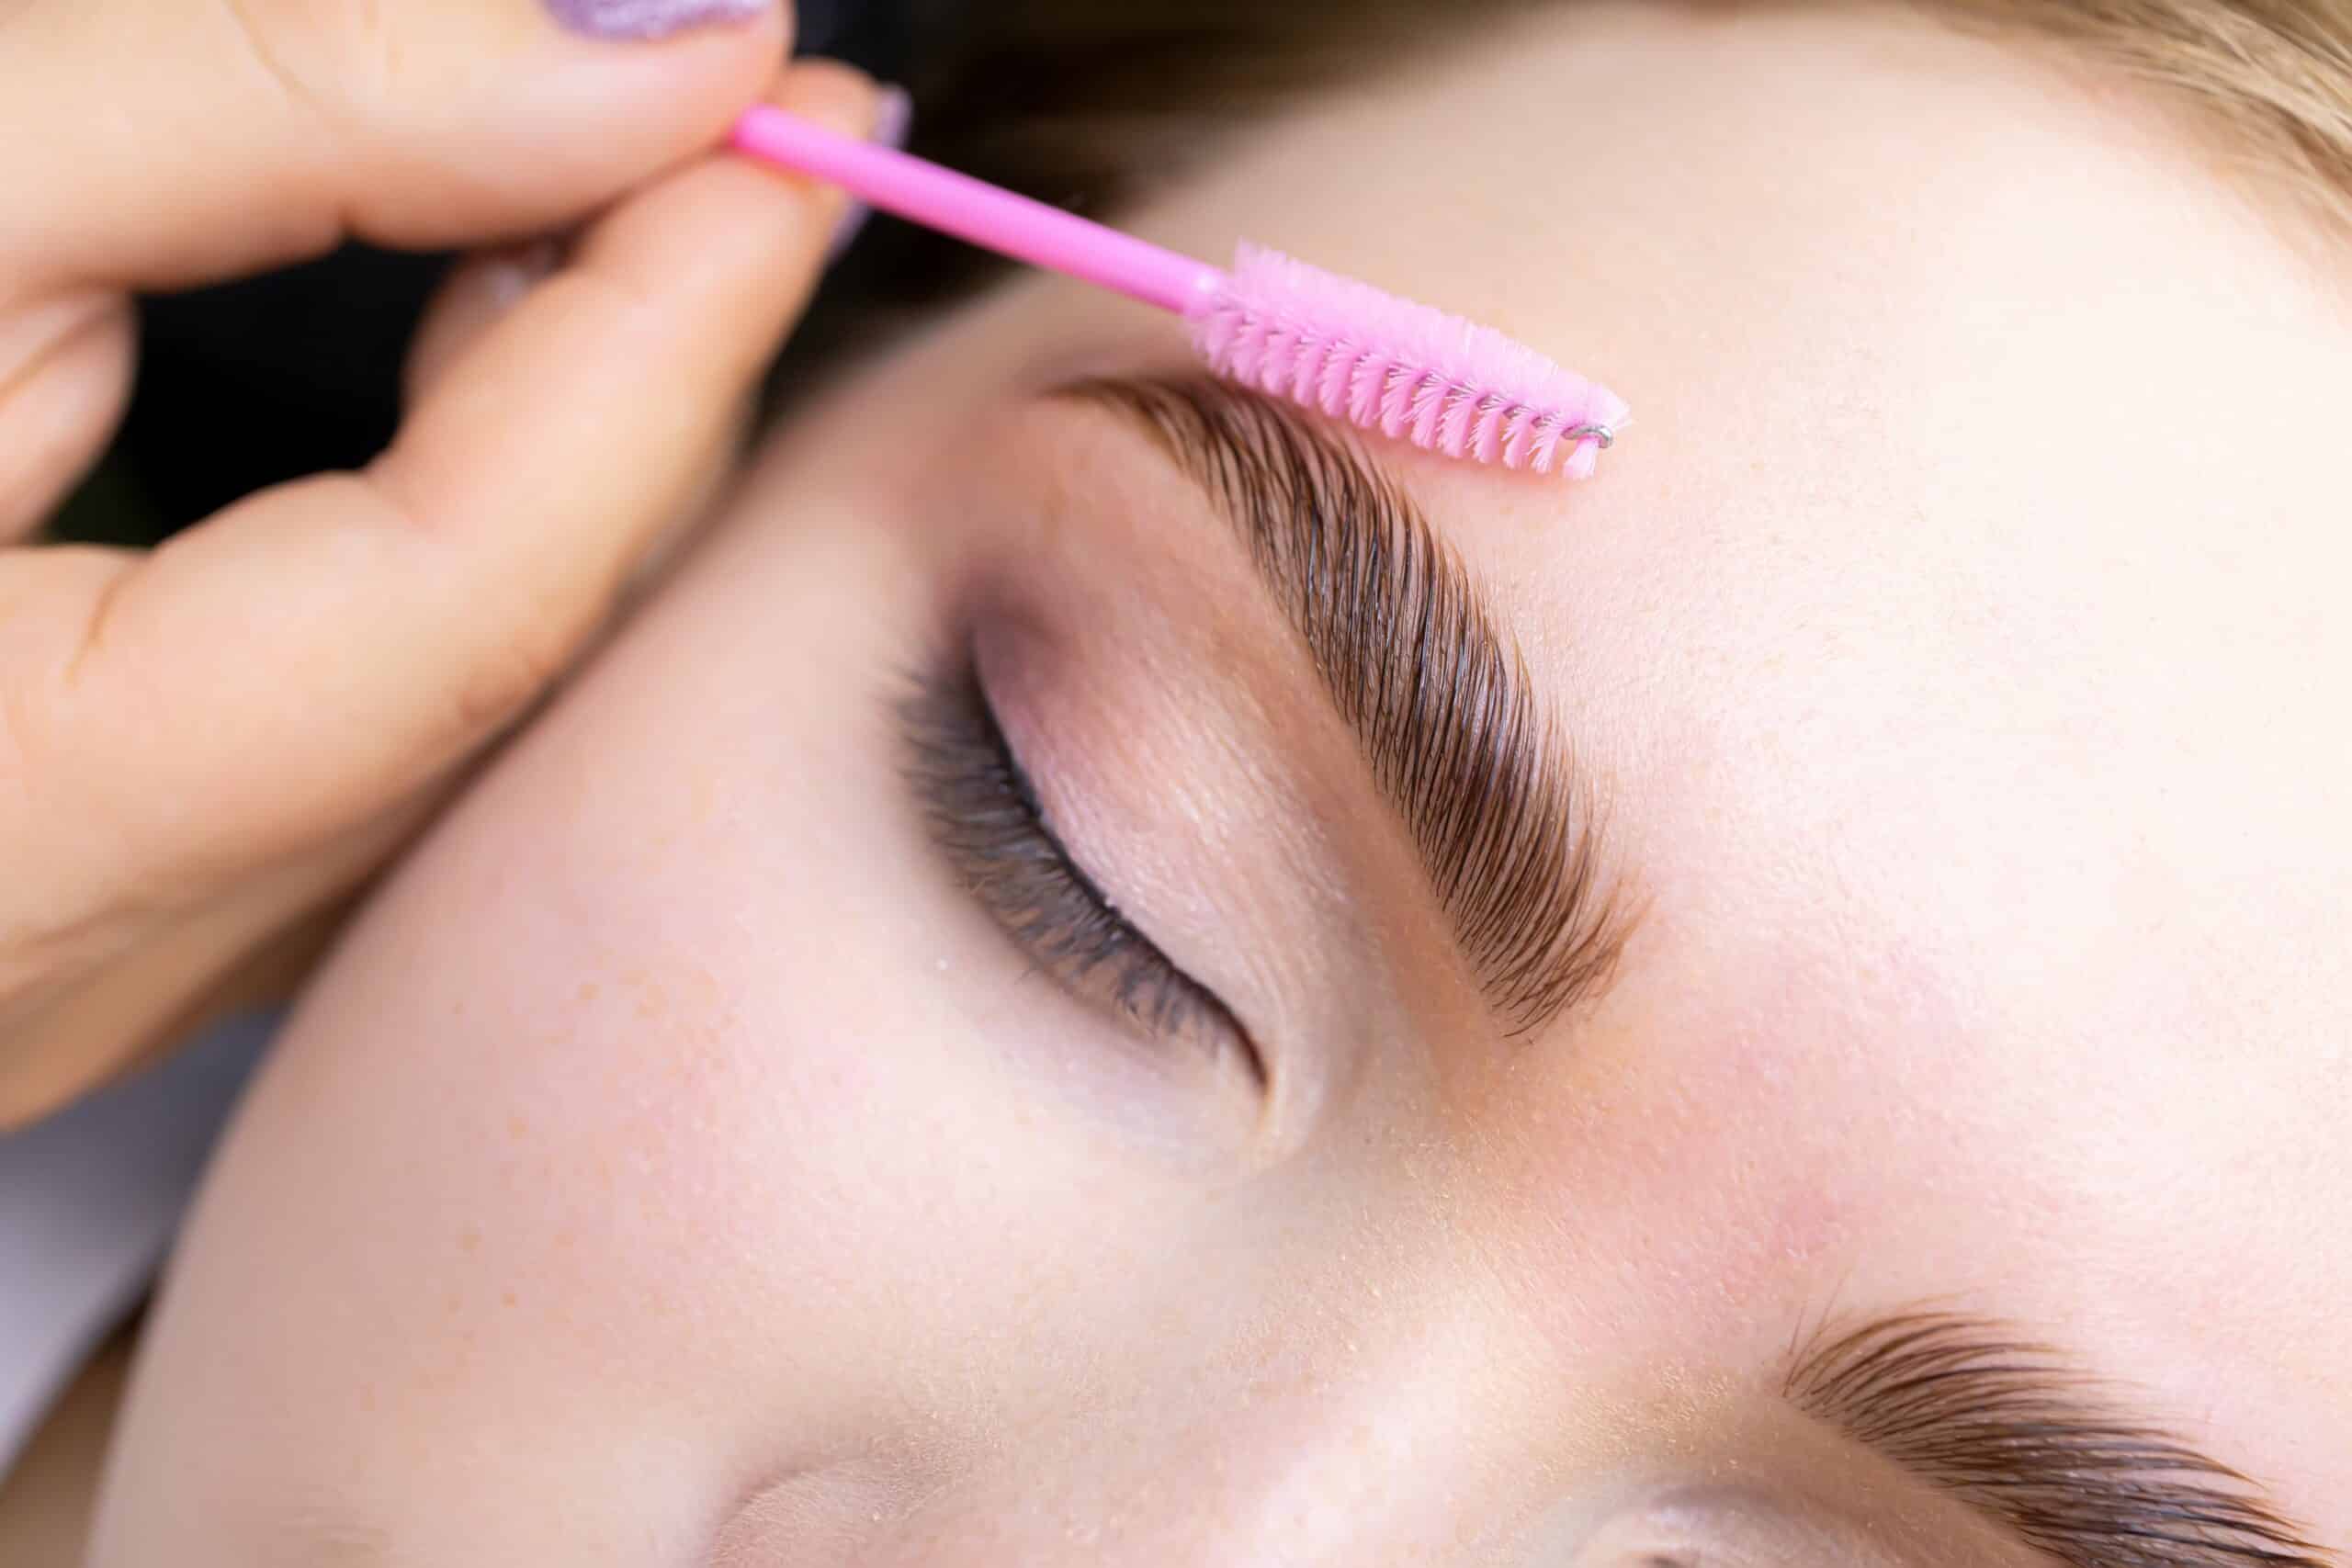 Closeup of woman's eye area as a small brow comb brushes her shaped eyebrow